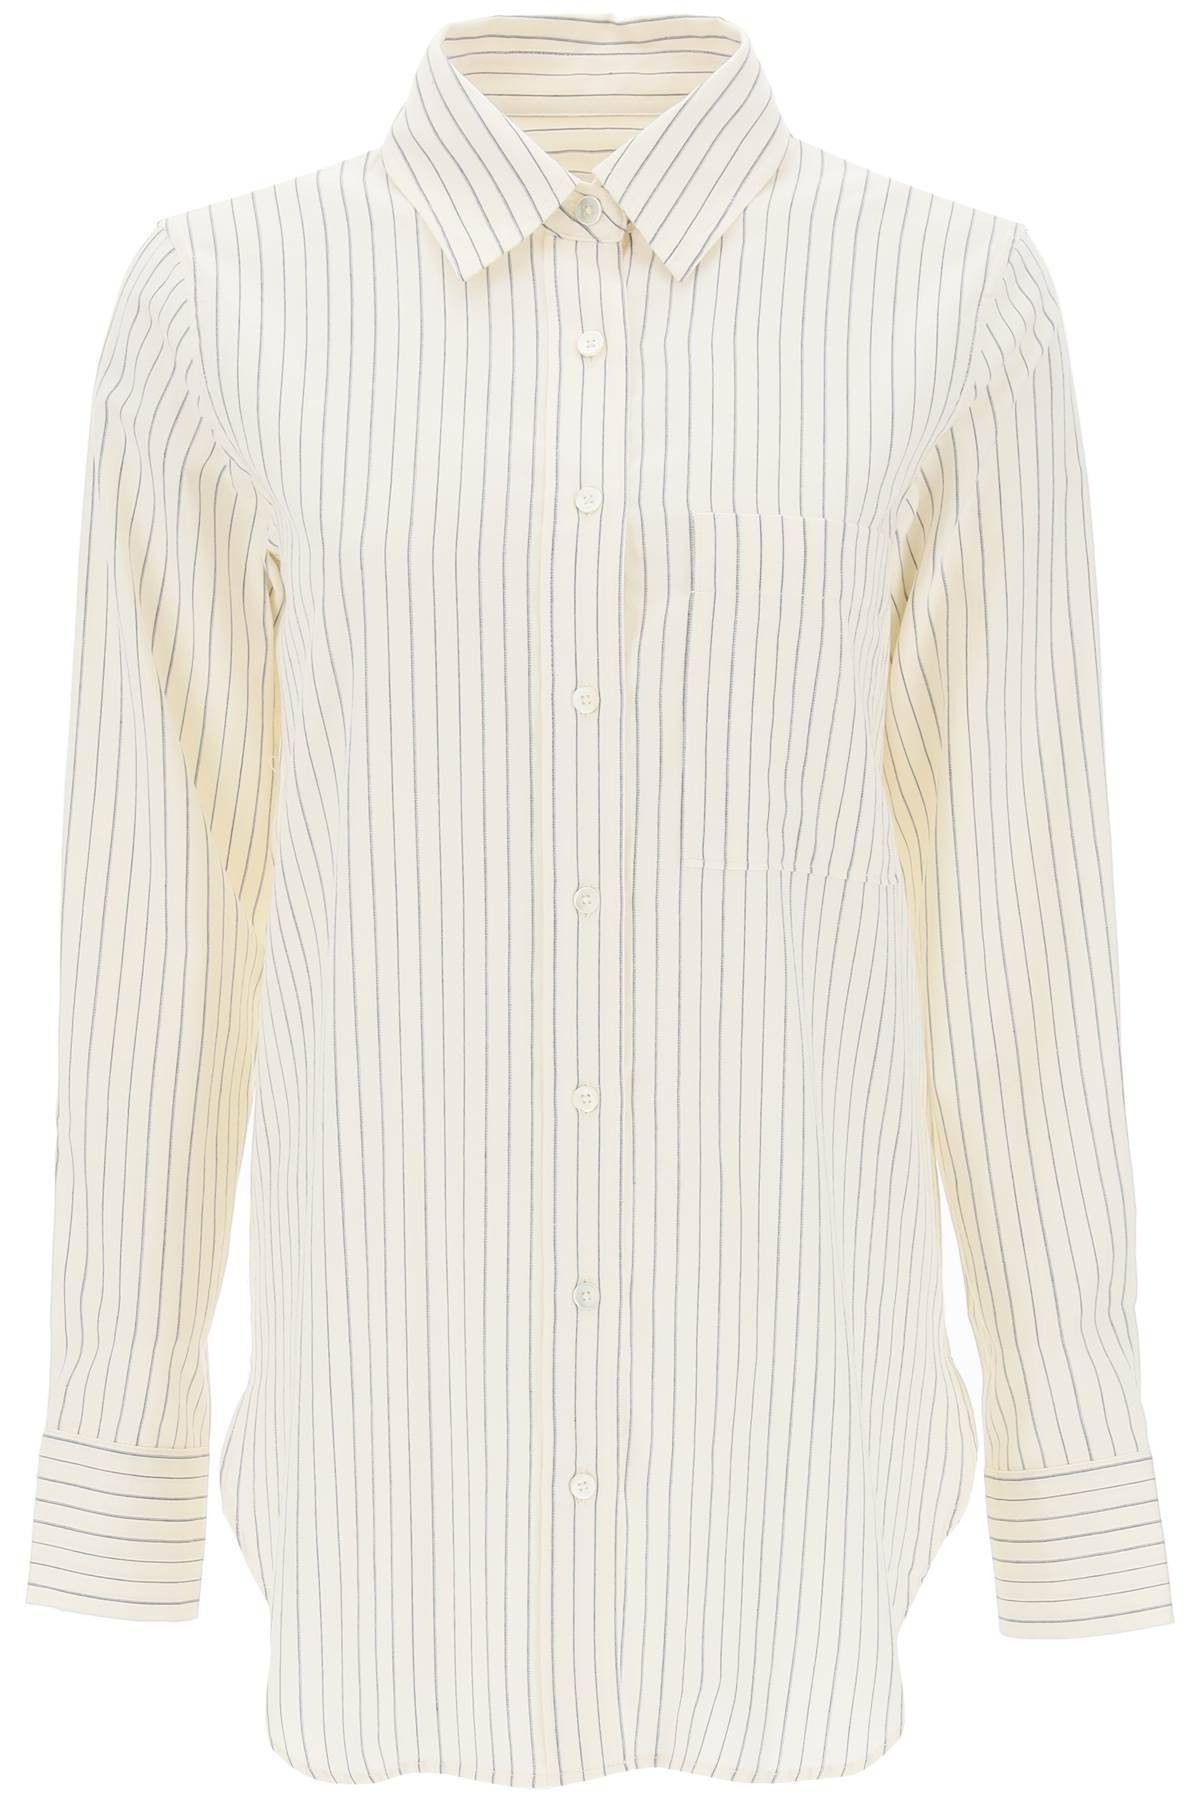 CLOSED CLOSED striped cotton-wool shirt